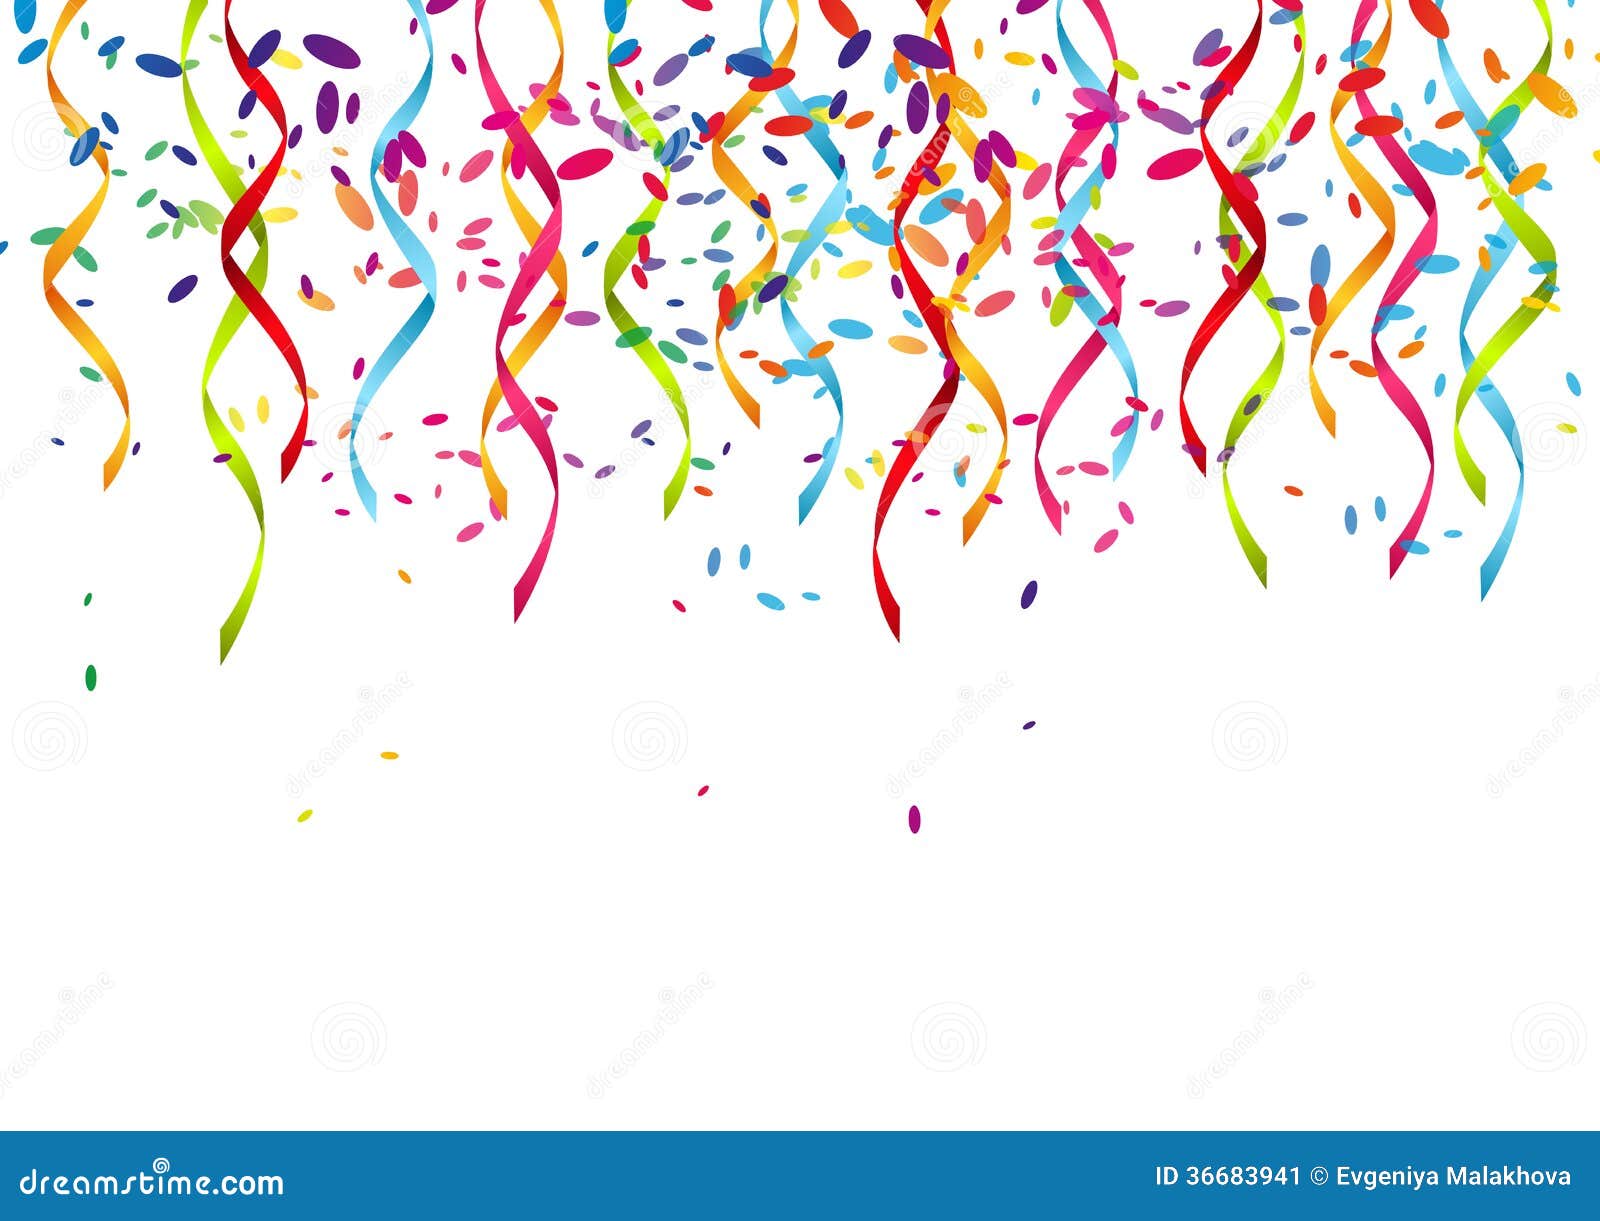 party-background-color-ribbons-36683941.jpg